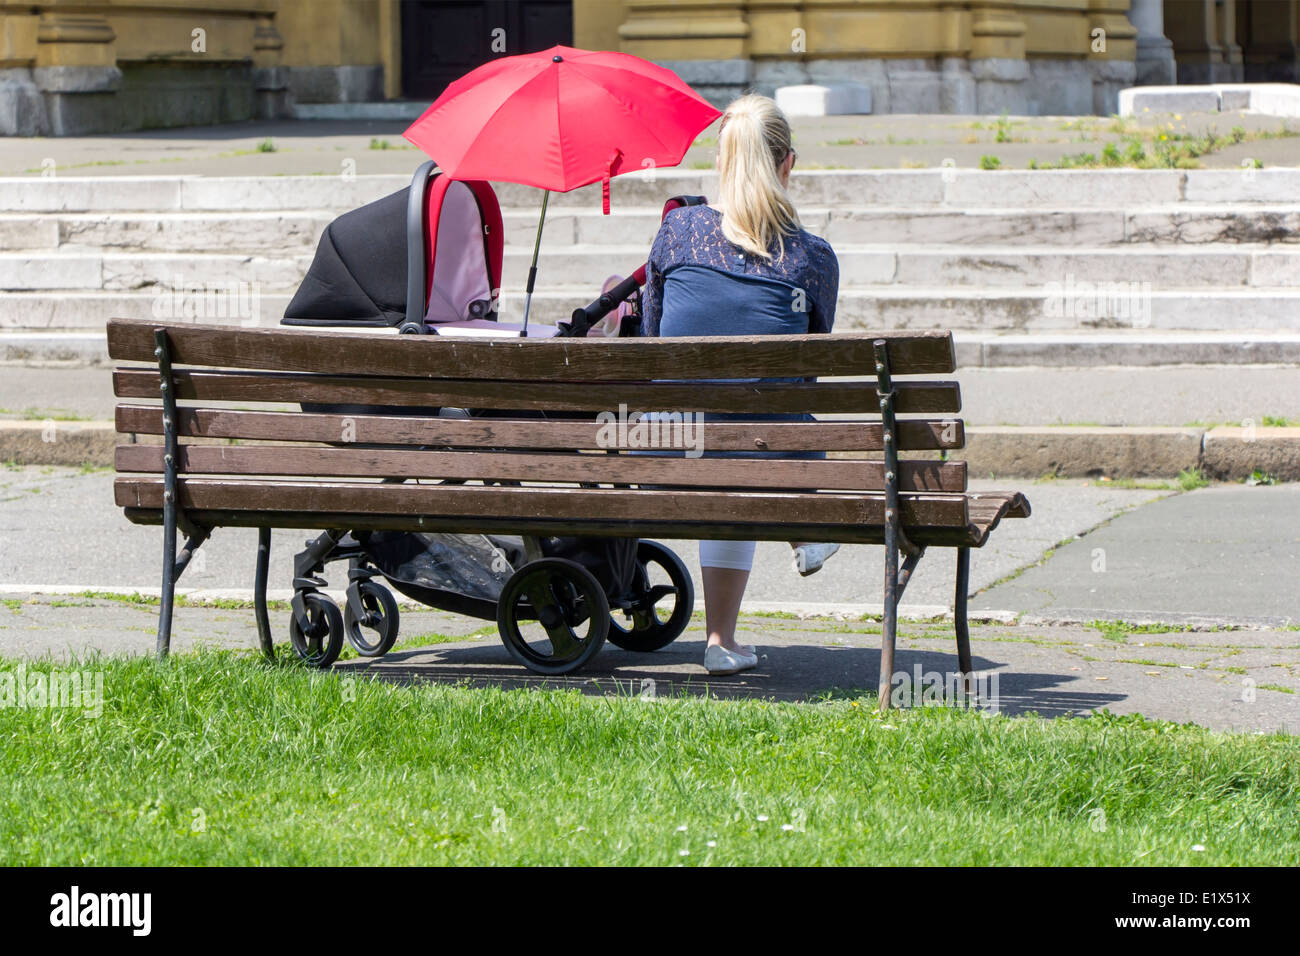 Mothers and baby in stroller, sitting on bench Stock Photo